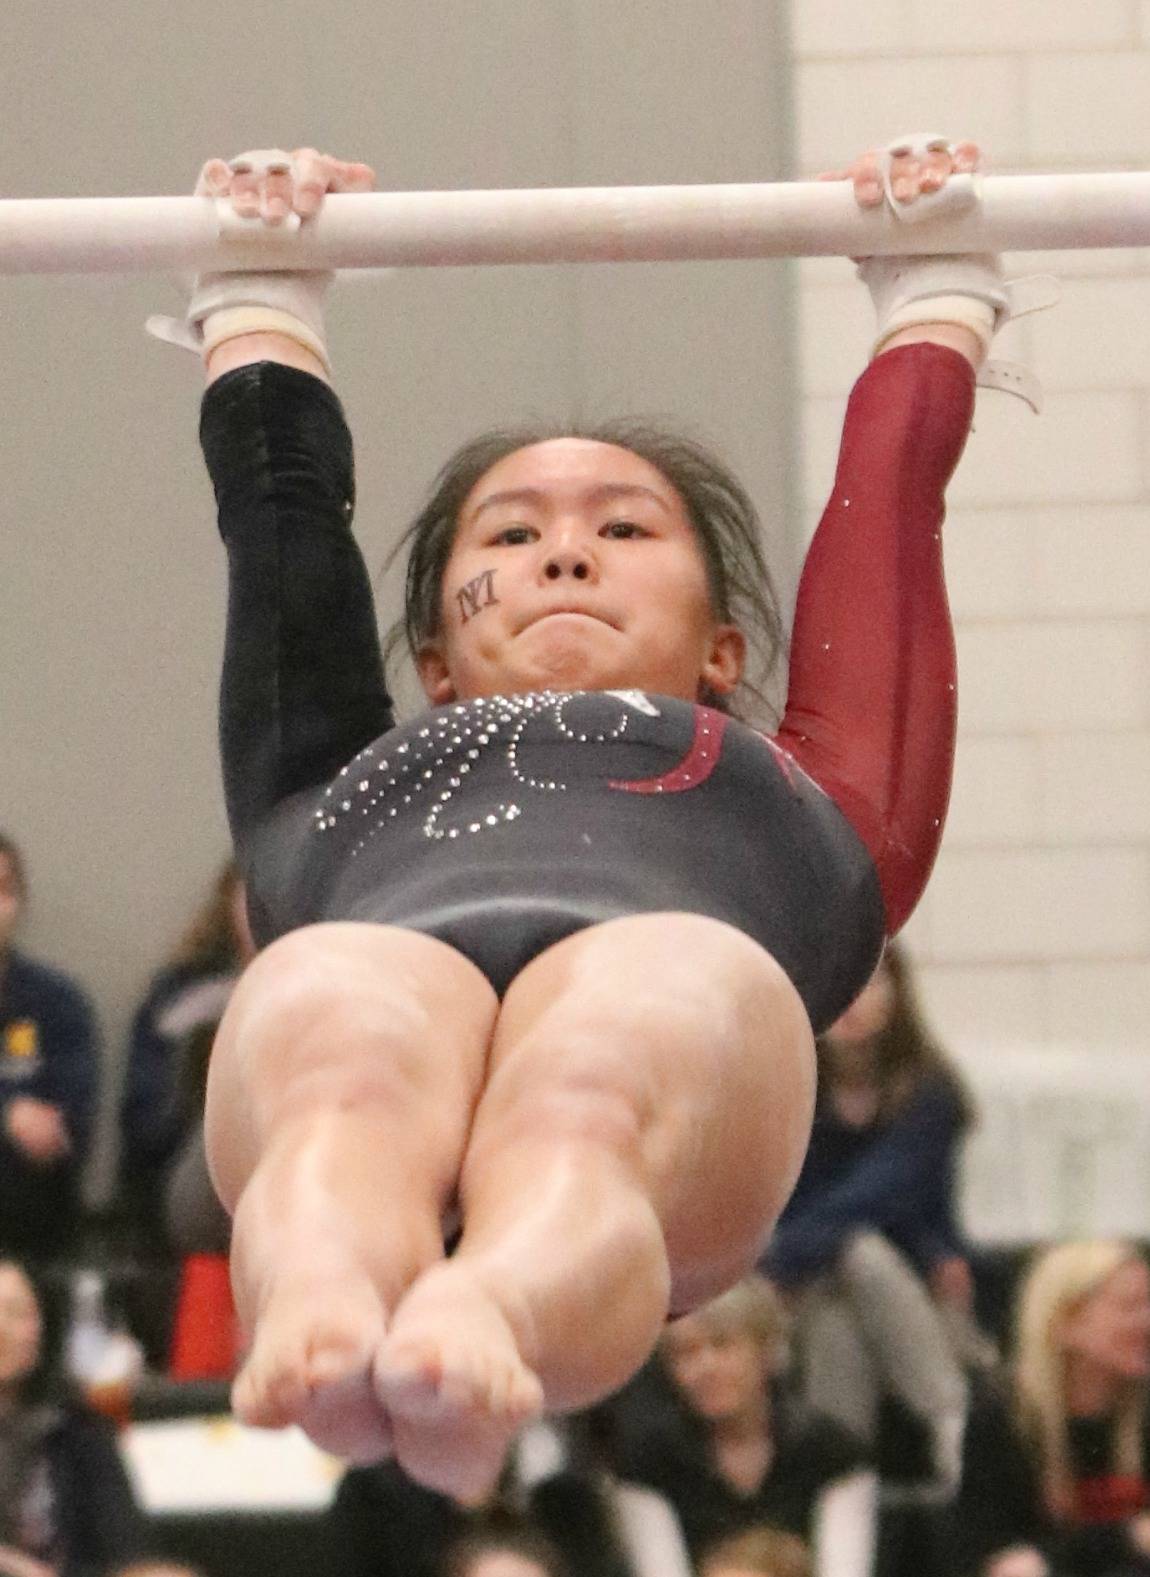 Mercer Island’s Rachel Ressmeyer tied for 11th on bars at the 1A/2A/3A state gymnastics championships at Sammamish High on Feb. 22. She scored a 9.1 on the event. Ava Motroni and Emery Sampson also competed for the Islanders. Andy Nystrom / staff photo